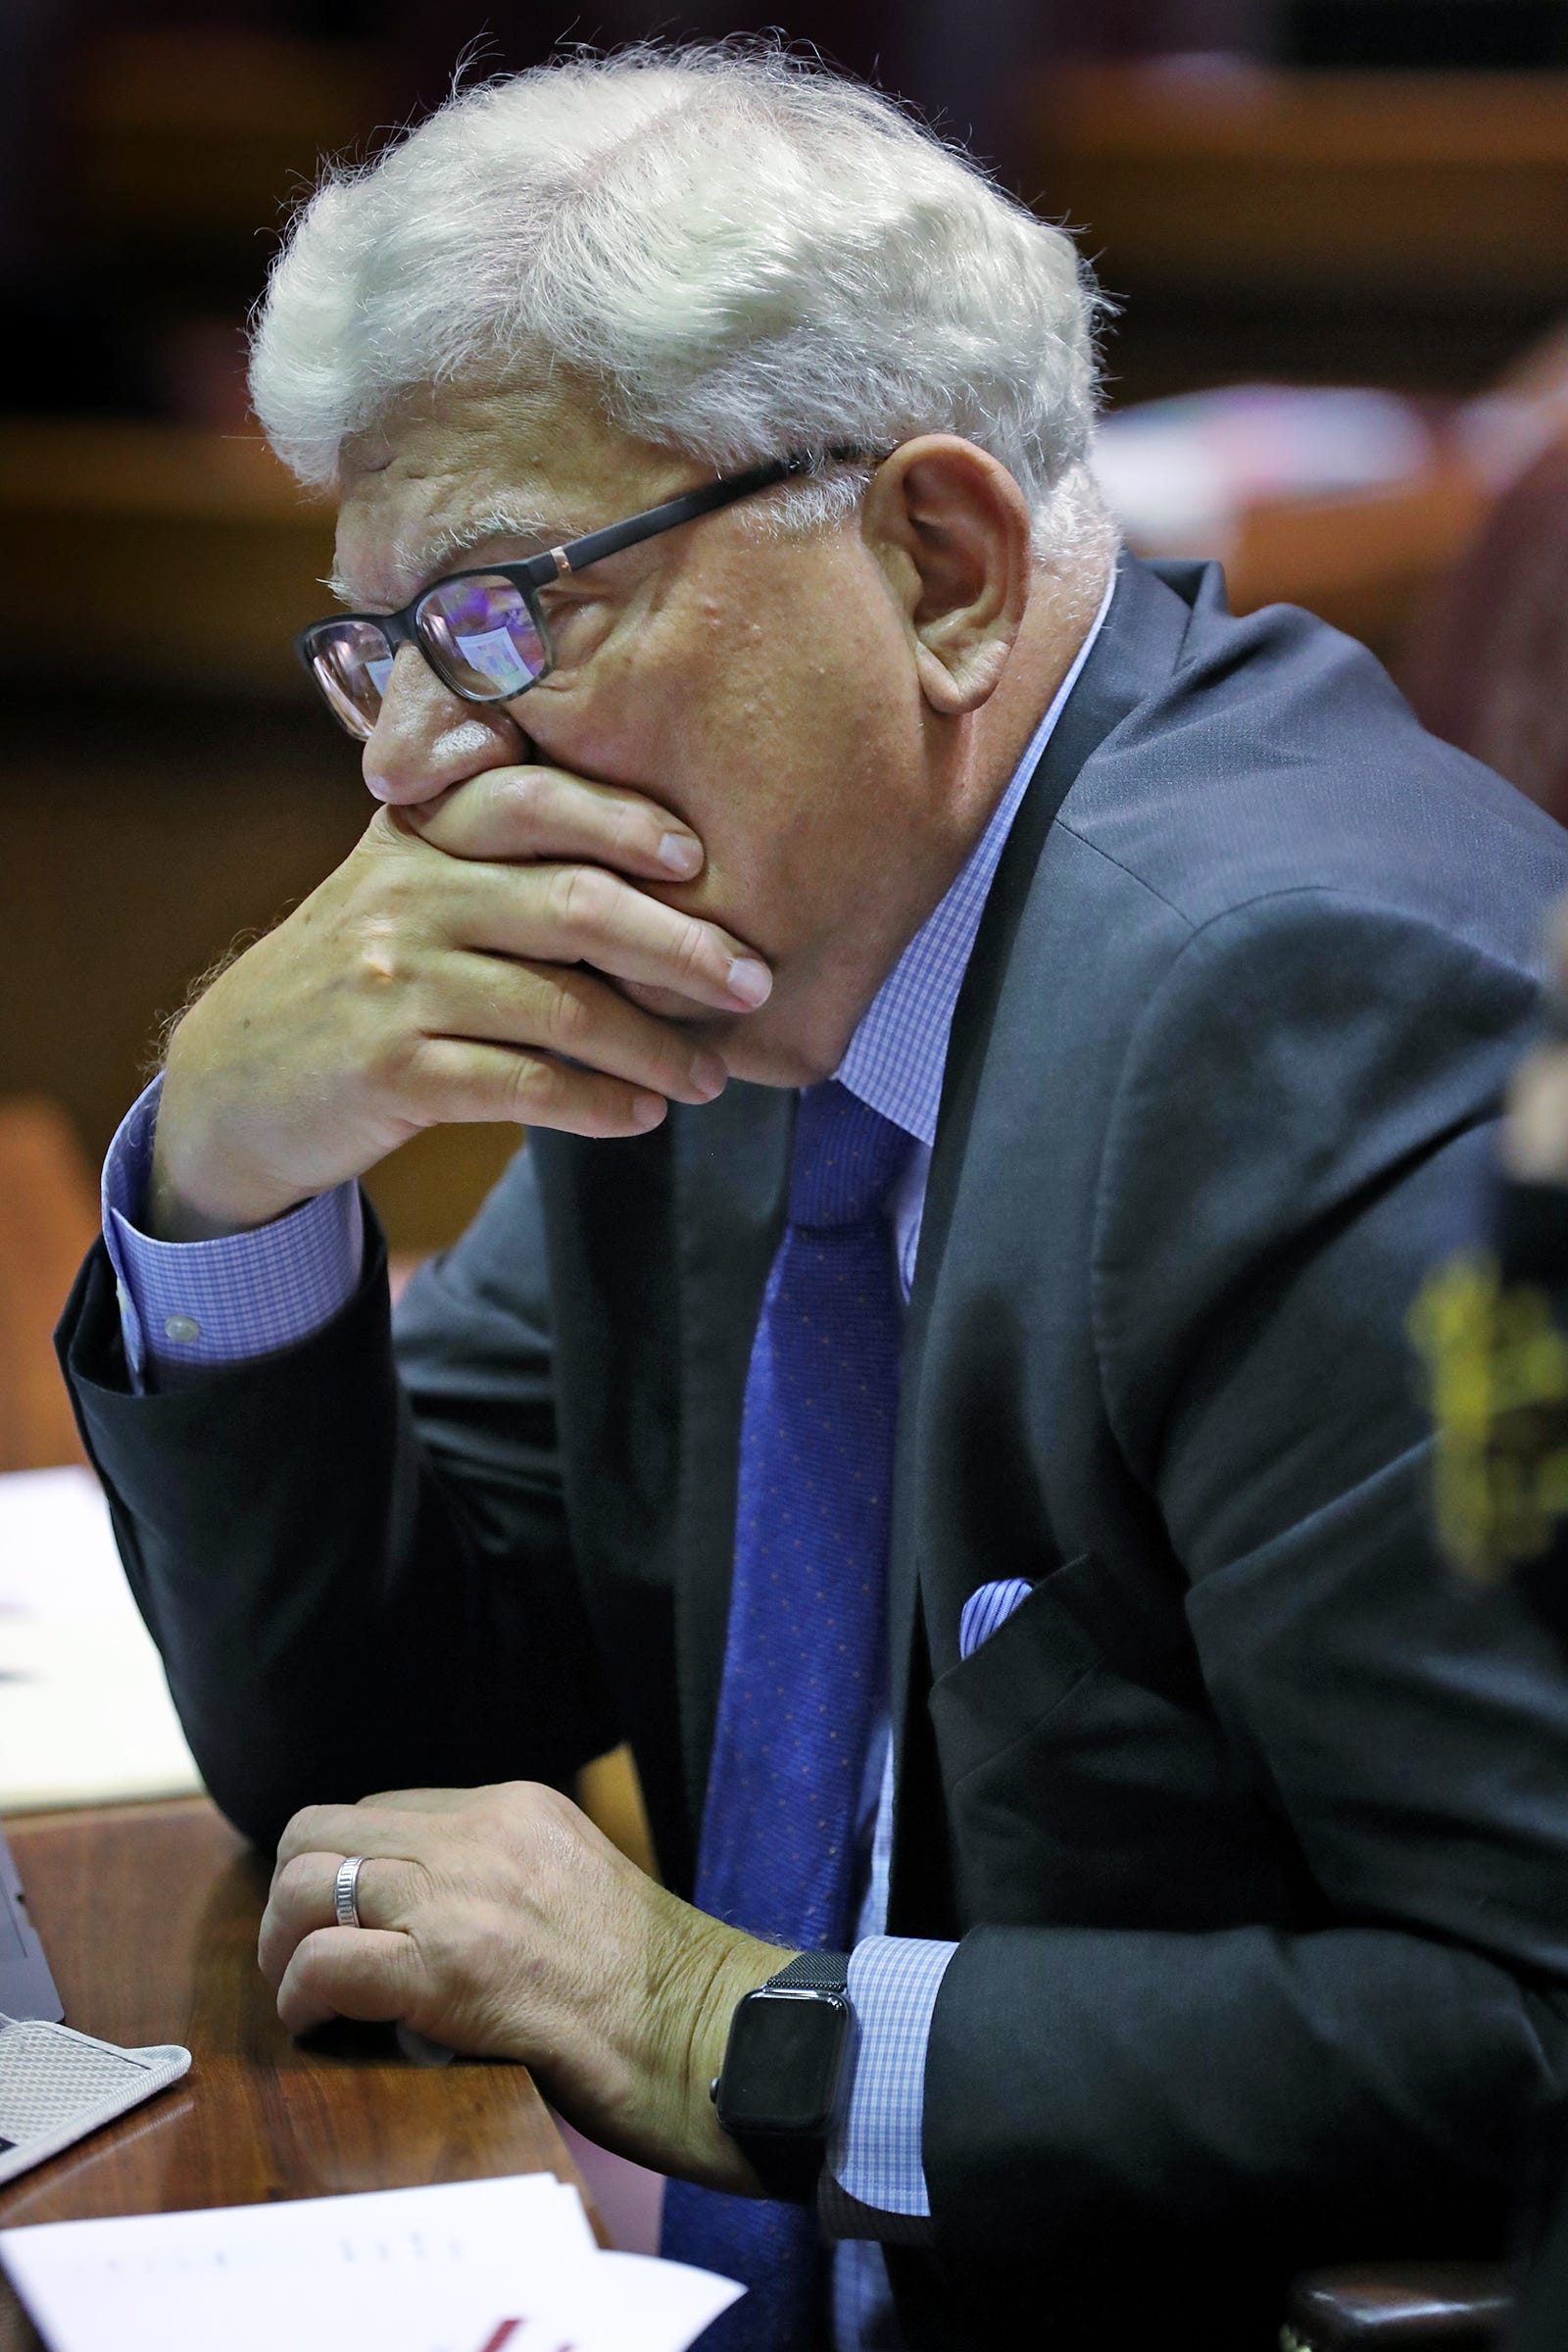 Rep. Ed Soliday, R-Valparaiso, listens in at the Indiana Statehouse. Soliday is the chair of the House Utilities Committee, which discusses many bills and topics relevant to energy and electricity topics in the state, including rate affordability.